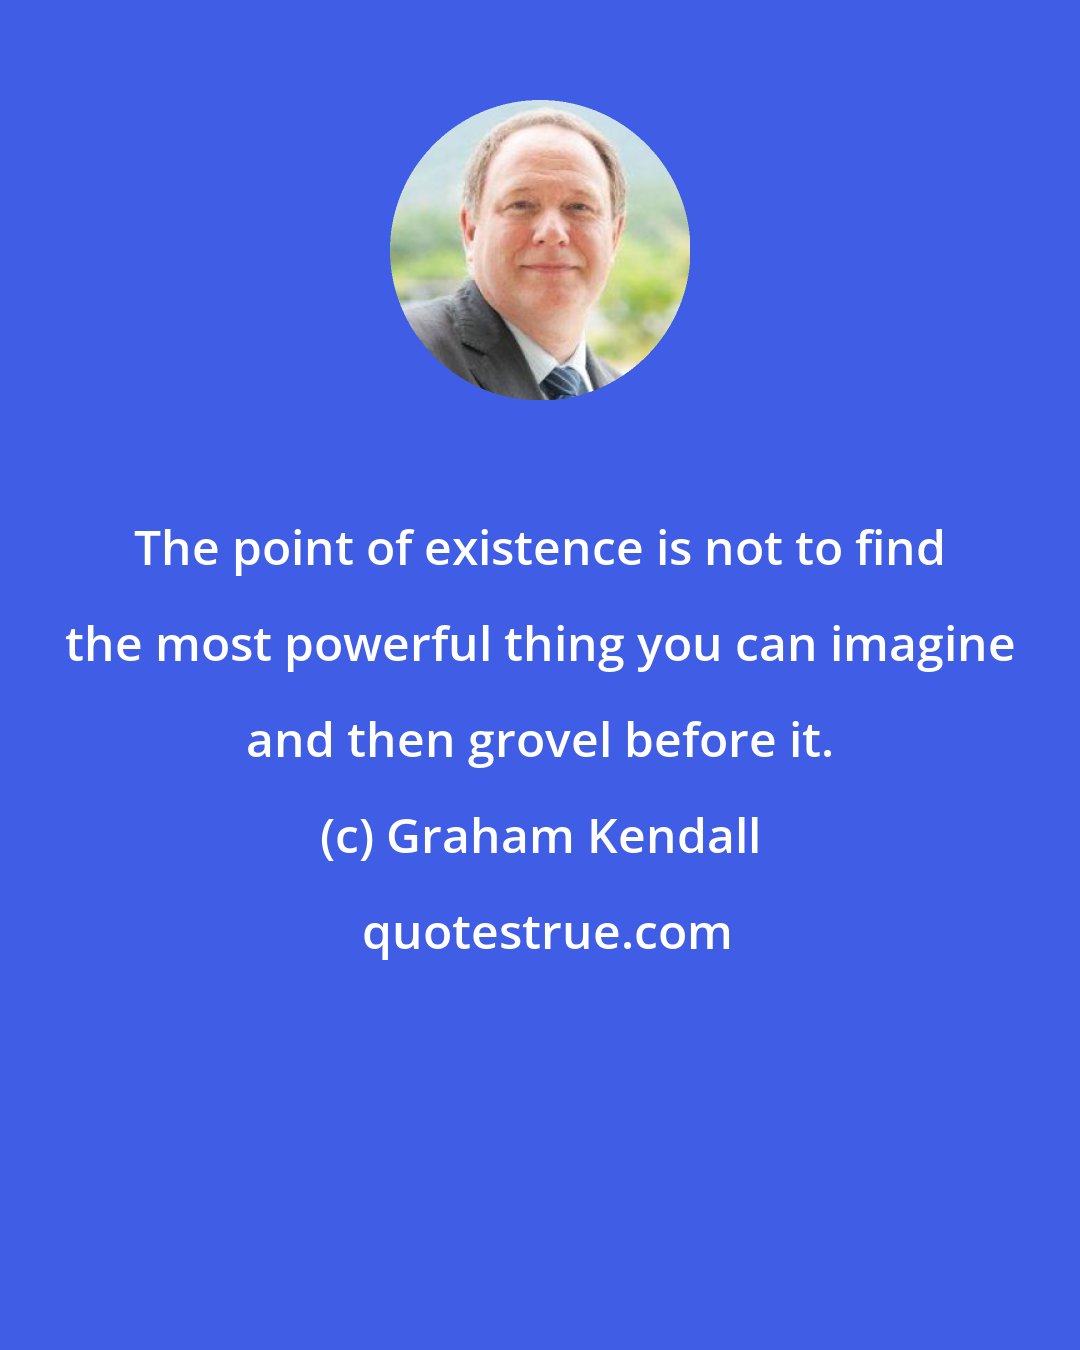 Graham Kendall: The point of existence is not to find the most powerful thing you can imagine and then grovel before it.